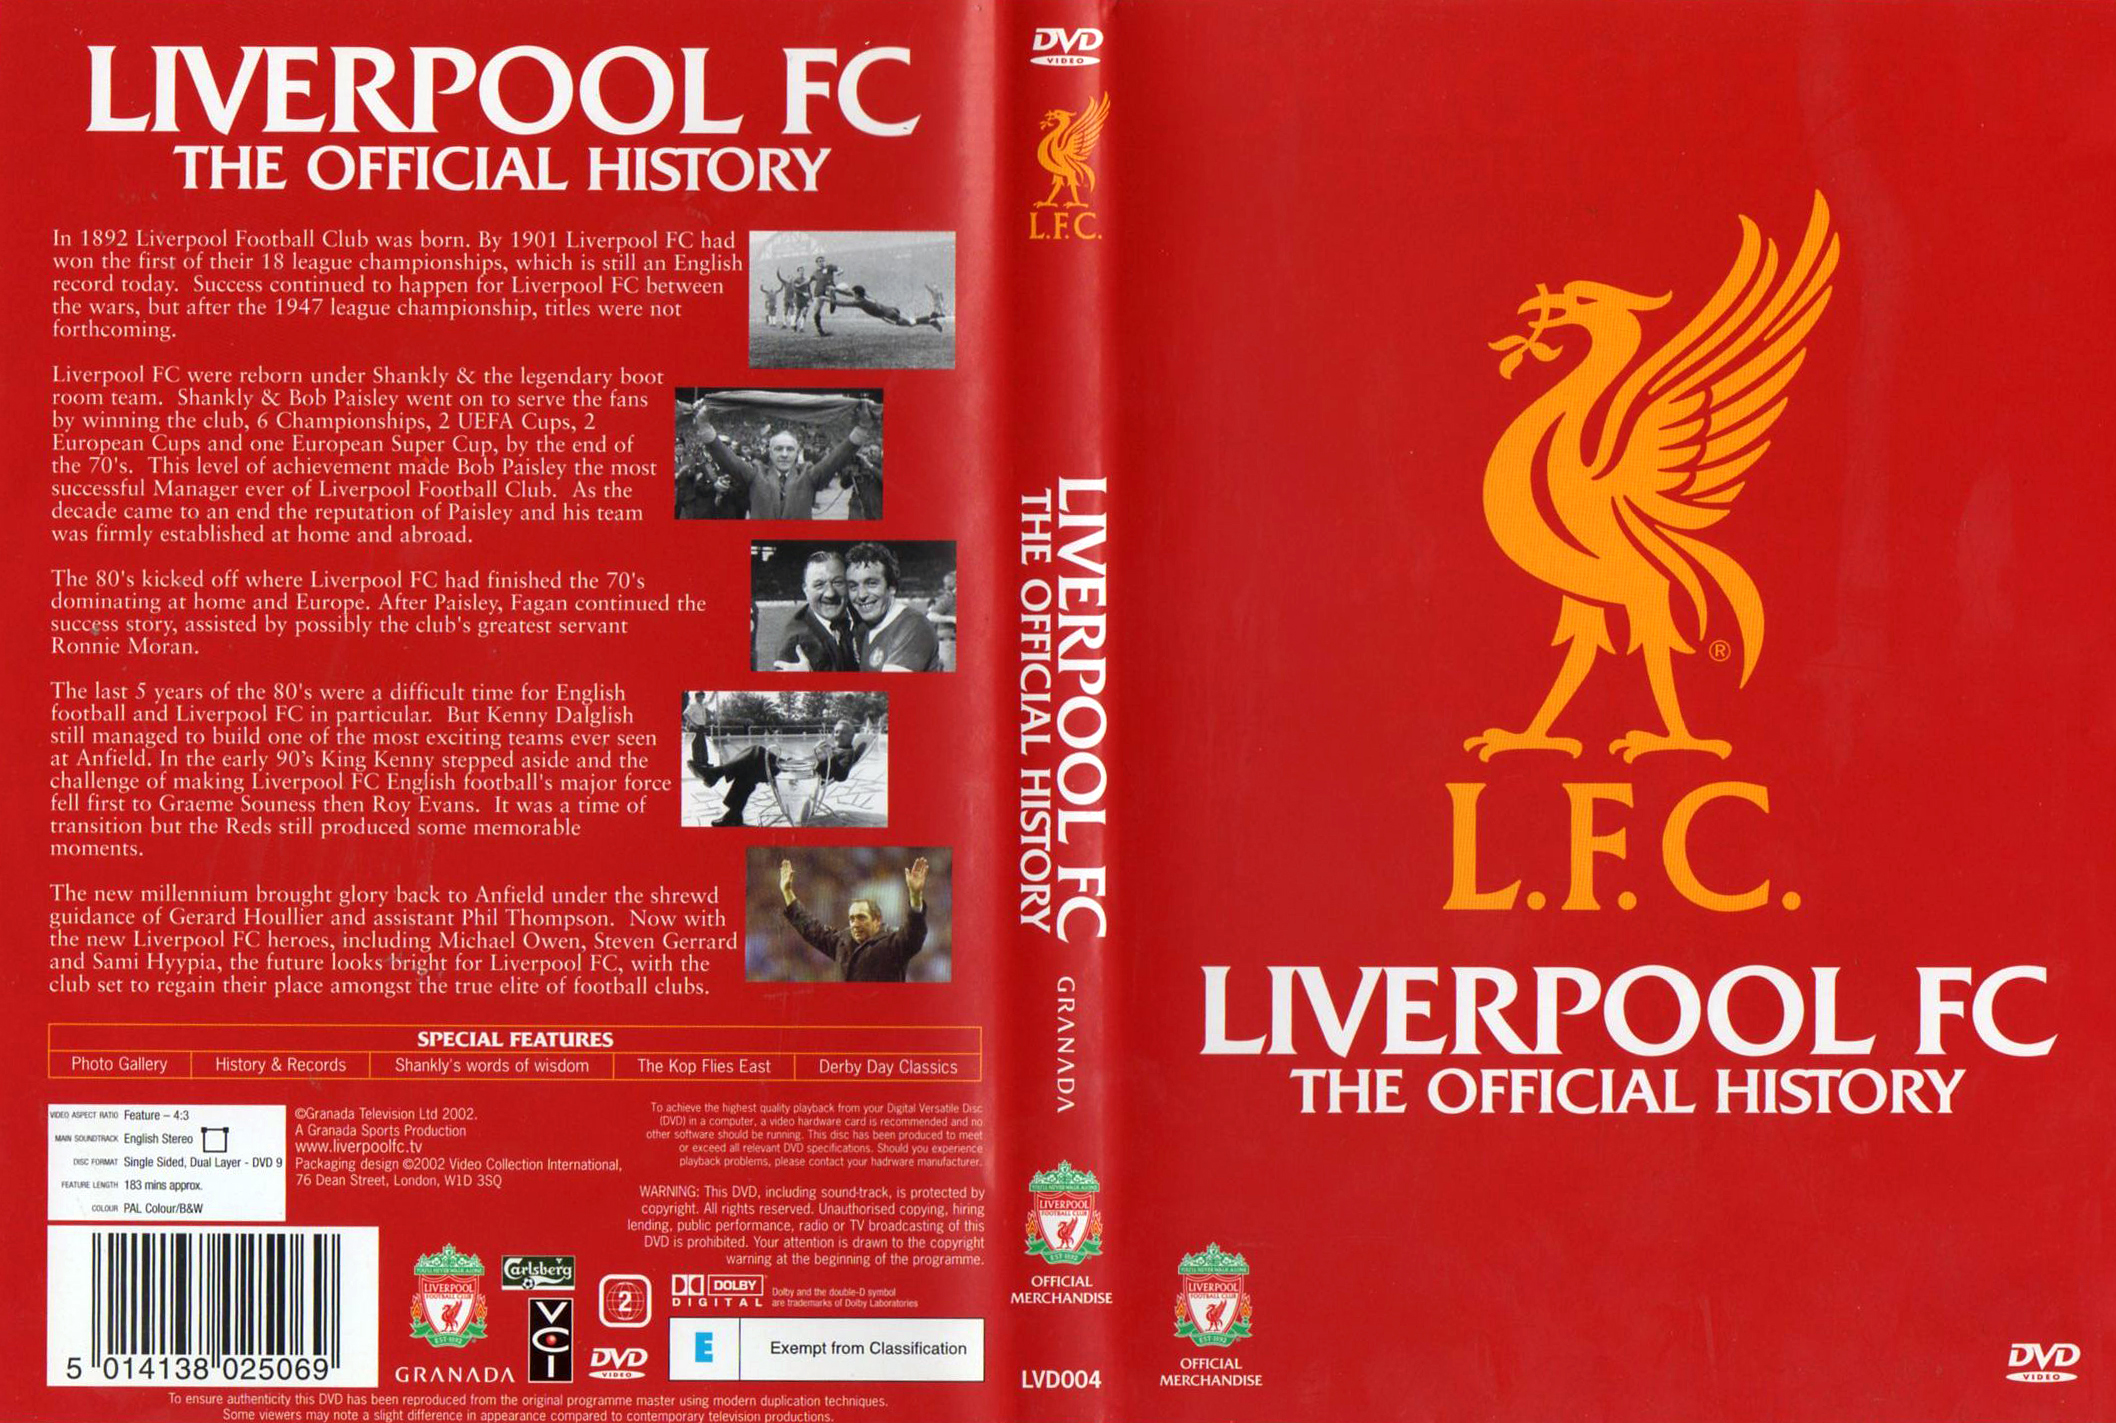 Jaquette DVD Liverpool FC the official history